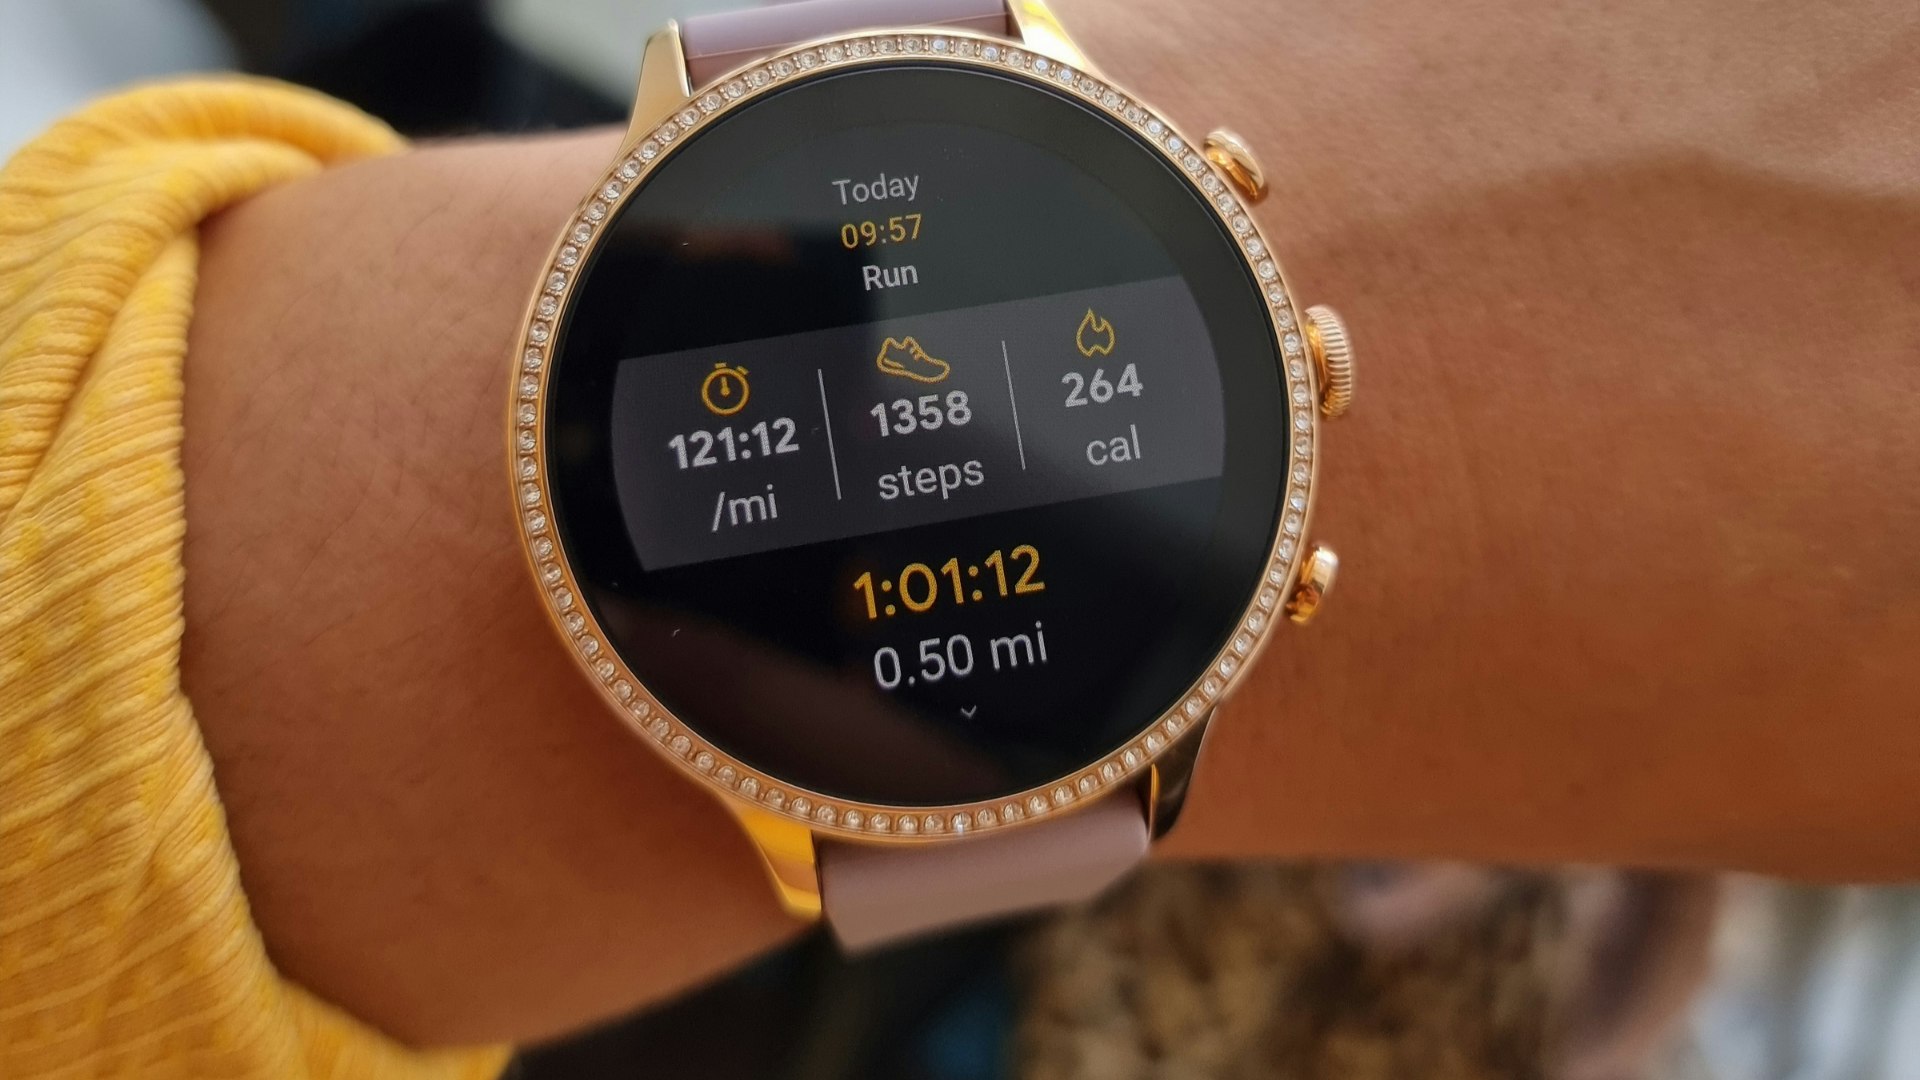 Fossil Gen 5 review: Good one, but just for Android users